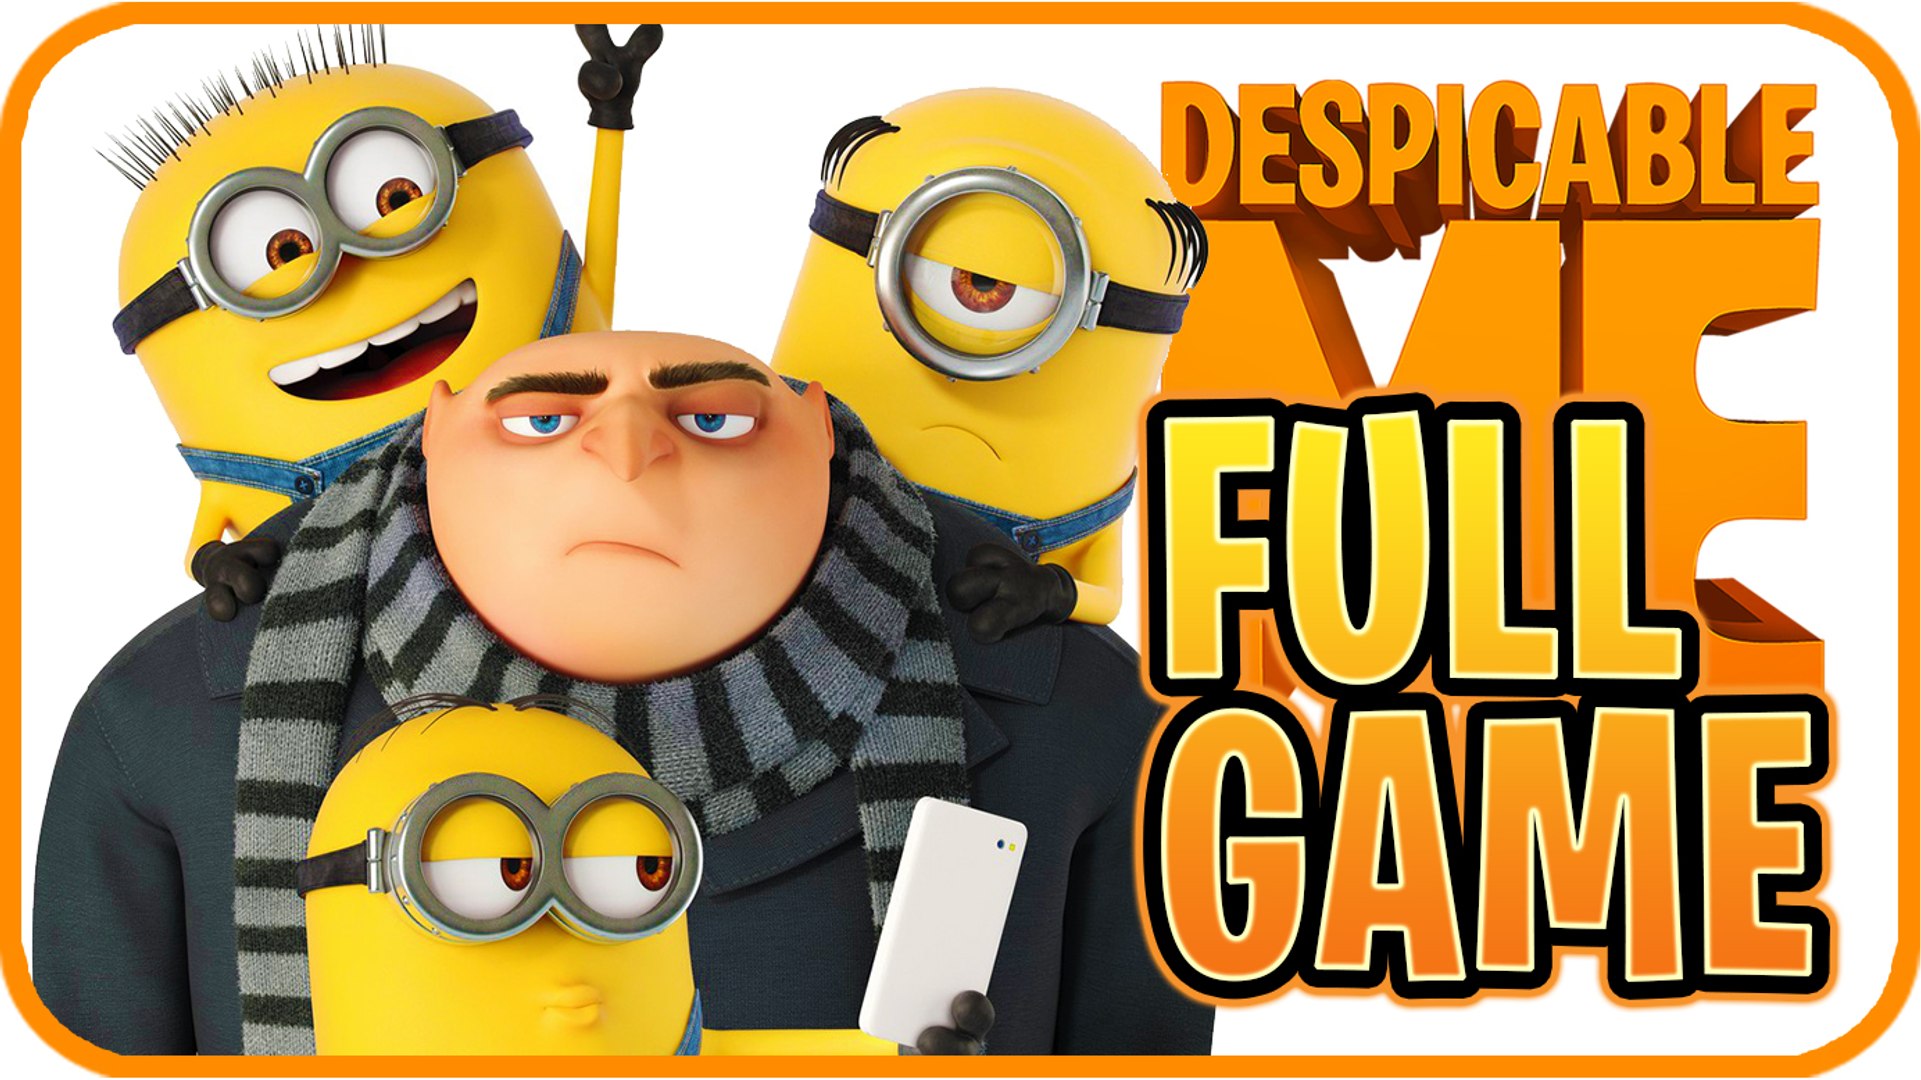 Despicable Me FULL GAME Longplay (PSP, Wii, PS2) Minions Walkthrough -  video Dailymotion